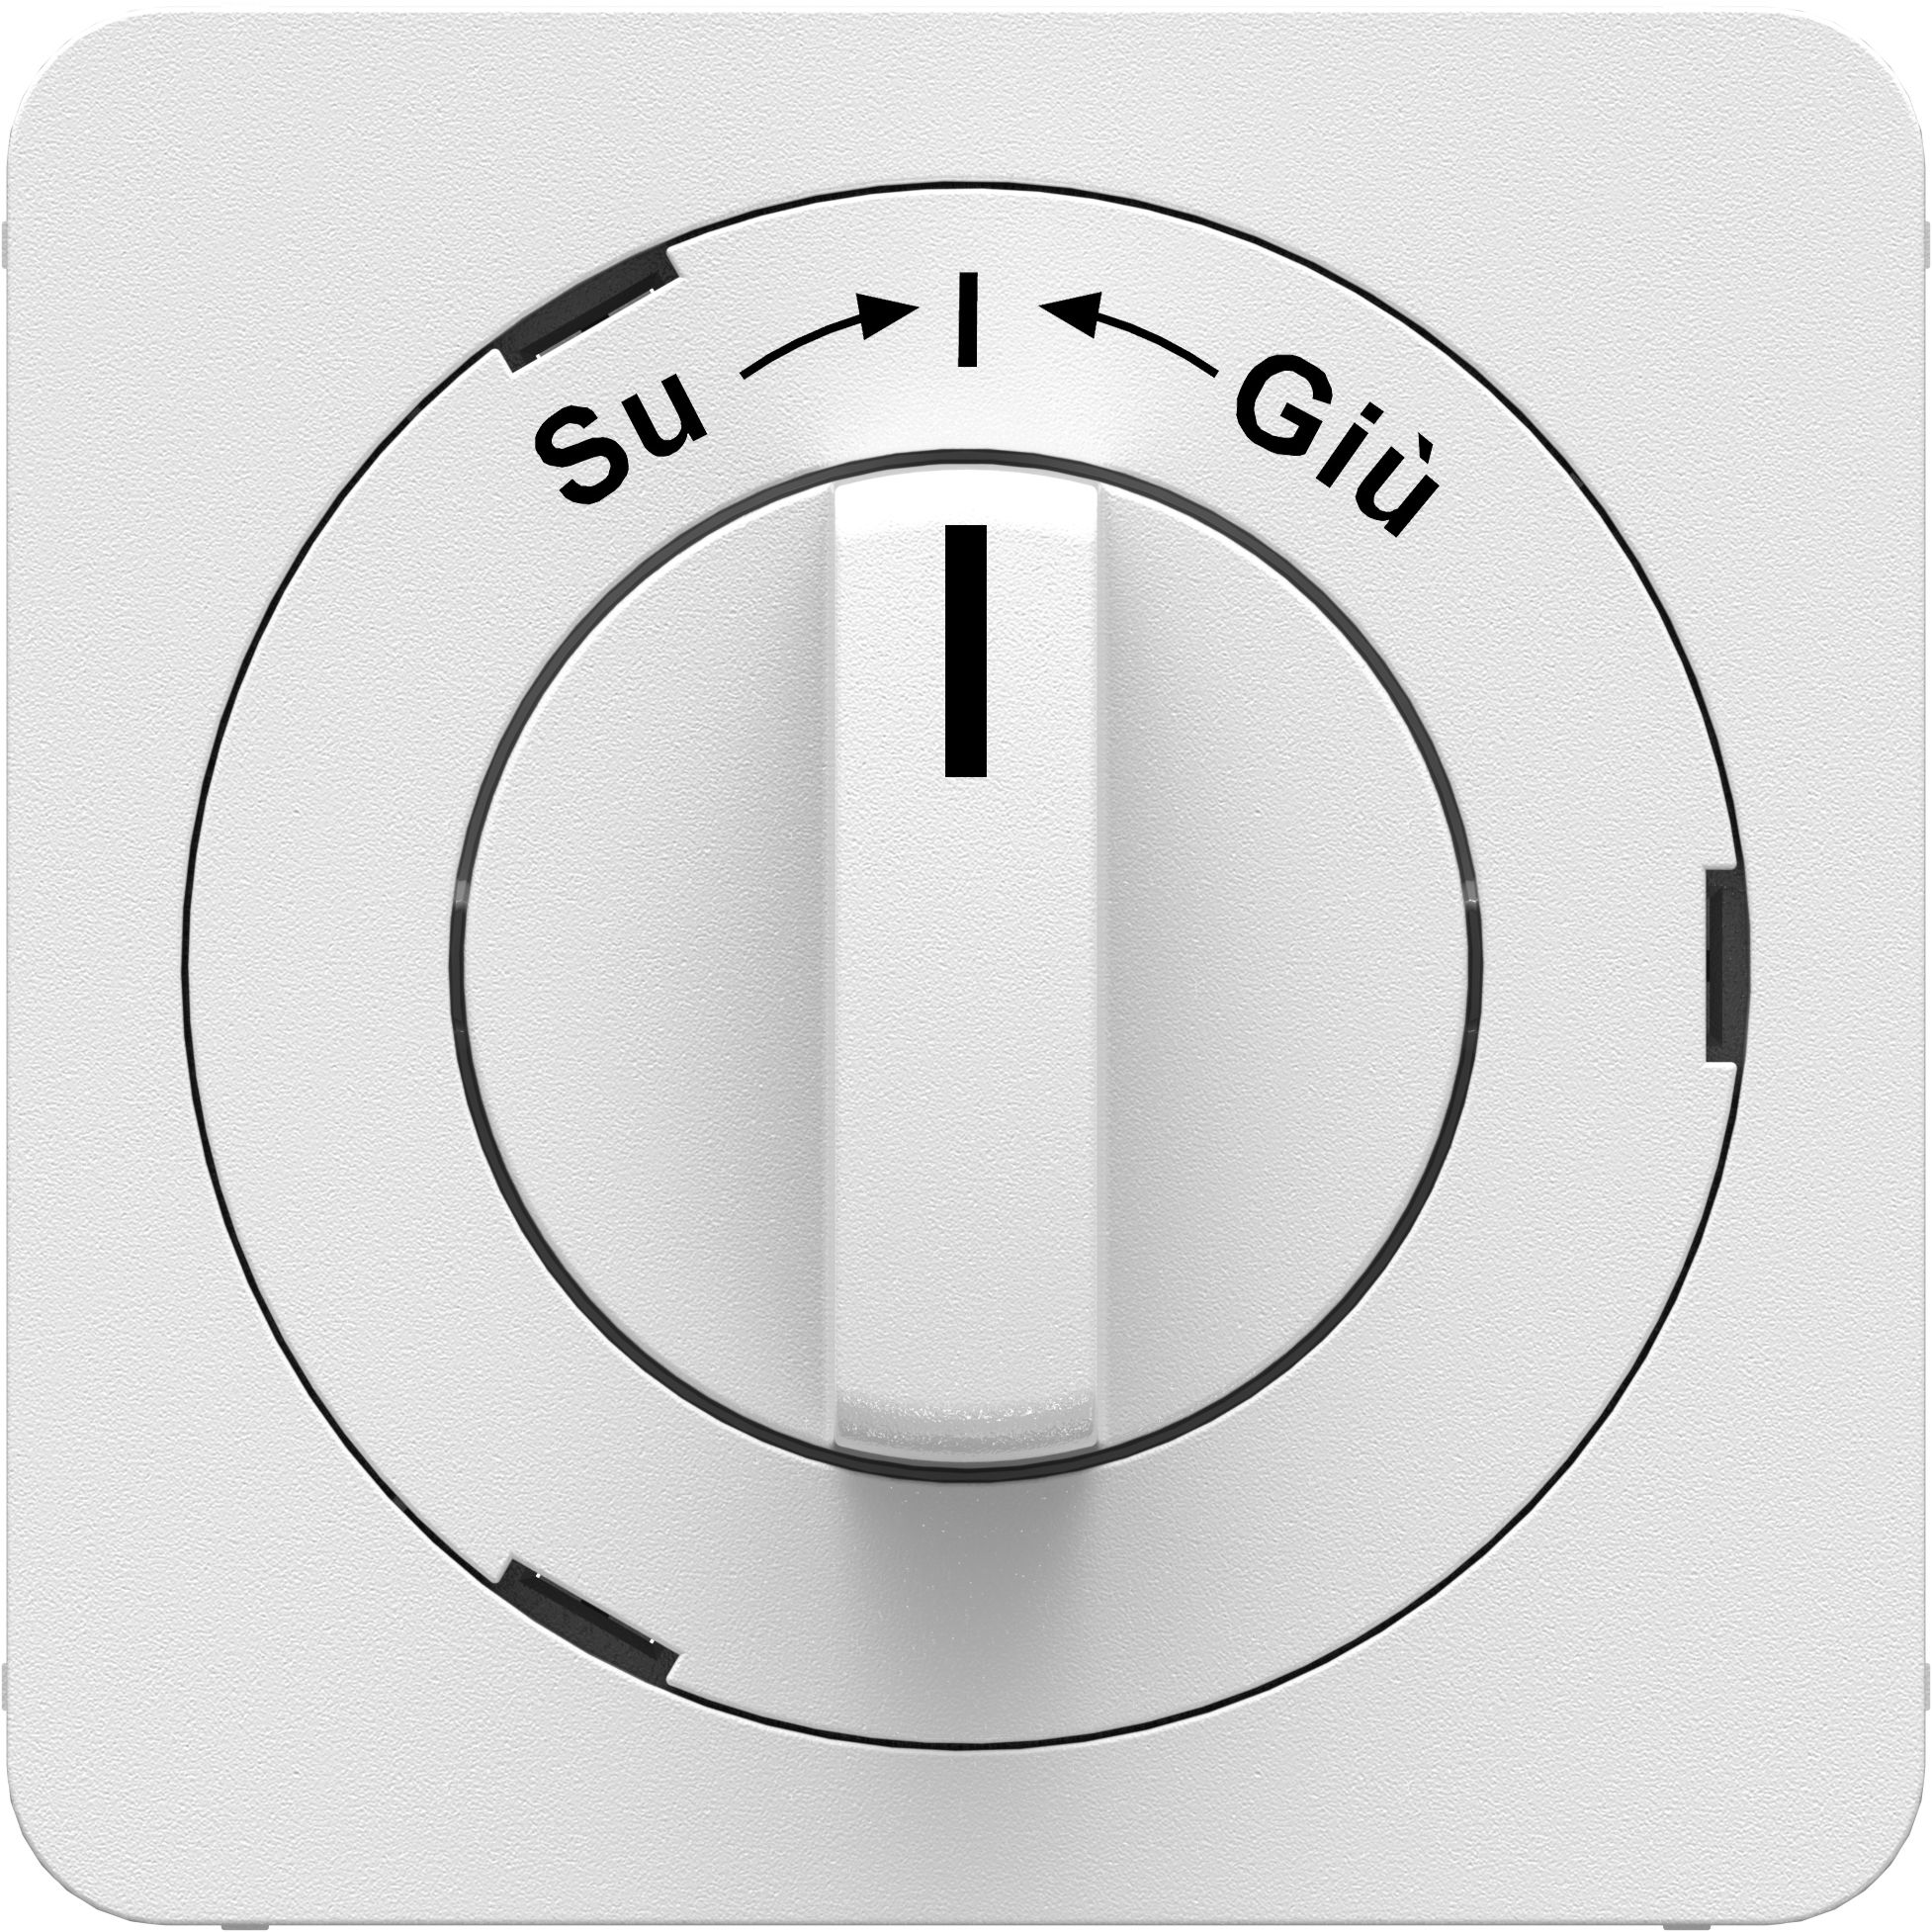 Front plates for turnable switch Su --> I <-- Giù white